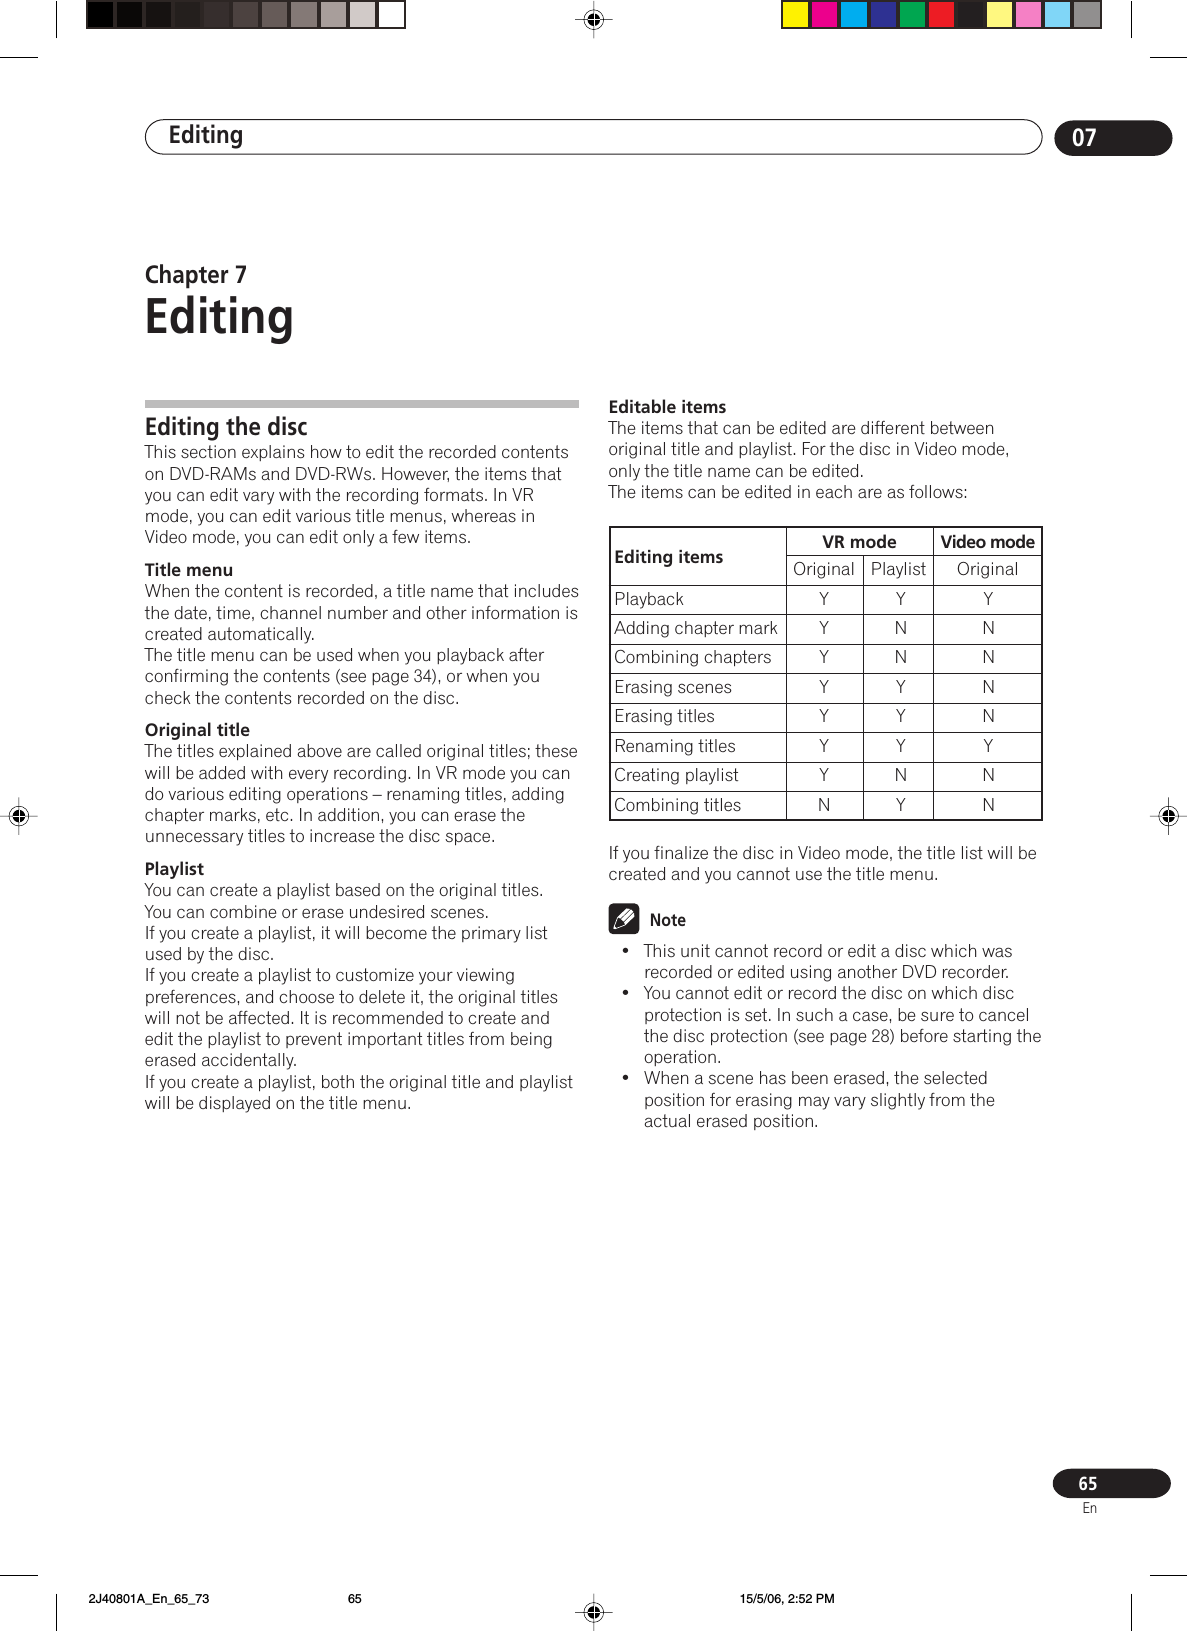 Editing 0765EnChapter 7EditingEditing the discThis section explains how to edit the recorded contentson DVD-RAMs and DVD-RWs. However, the items thatyou can edit vary with the recording formats. In VRmode, you can edit various title menus, whereas inVideo mode, you can edit only a few items.Title menuWhen the content is recorded, a title name that includesthe date, time, channel number and other information iscreated automatically.The title menu can be used when you playback afterconfirming the contents (see page 34), or when youcheck the contents recorded on the disc.Original titleThe titles explained above are called original titles; thesewill be added with every recording. In VR mode you cando various editing operations – renaming titles, addingchapter marks, etc. In addition, you can erase theunnecessary titles to increase the disc space.PlaylistYou can create a playlist based on the original titles.You can combine or erase undesired scenes.If you create a playlist, it will become the primary listused by the disc.If you create a playlist to customize your viewingpreferences, and choose to delete it, the original titleswill not be affected. It is recommended to create andedit the playlist to prevent important titles from beingerased accidentally.If you create a playlist, both the original title and playlistwill be displayed on the title menu.Editable itemsThe items that can be edited are different betweenoriginal title and playlist. For the disc in Video mode,only the title name can be edited.The items can be edited in each are as follows:If you finalize the disc in Video mode, the title list will becreated and you cannot use the title menu.Note•This unit cannot record or edit a disc which wasrecorded or edited using another DVD recorder.•You cannot edit or record the disc on which discprotection is set. In such a case, be sure to cancelthe disc protection (see page 28) before starting theoperation.•When a scene has been erased, the selectedposition for erasing may vary slightly from theactual erased position.Editing items VR modePlaybackAdding chapter markCombining chaptersErasing scenesErasing titlesRenaming titlesCreating playlistCombining titlesOriginal PlaylistYYYYYYYNYNNYYYNYYNNNNYNNVideo modeOriginal 2J40801A_En_65_73 15/5/06, 2:52 PM65